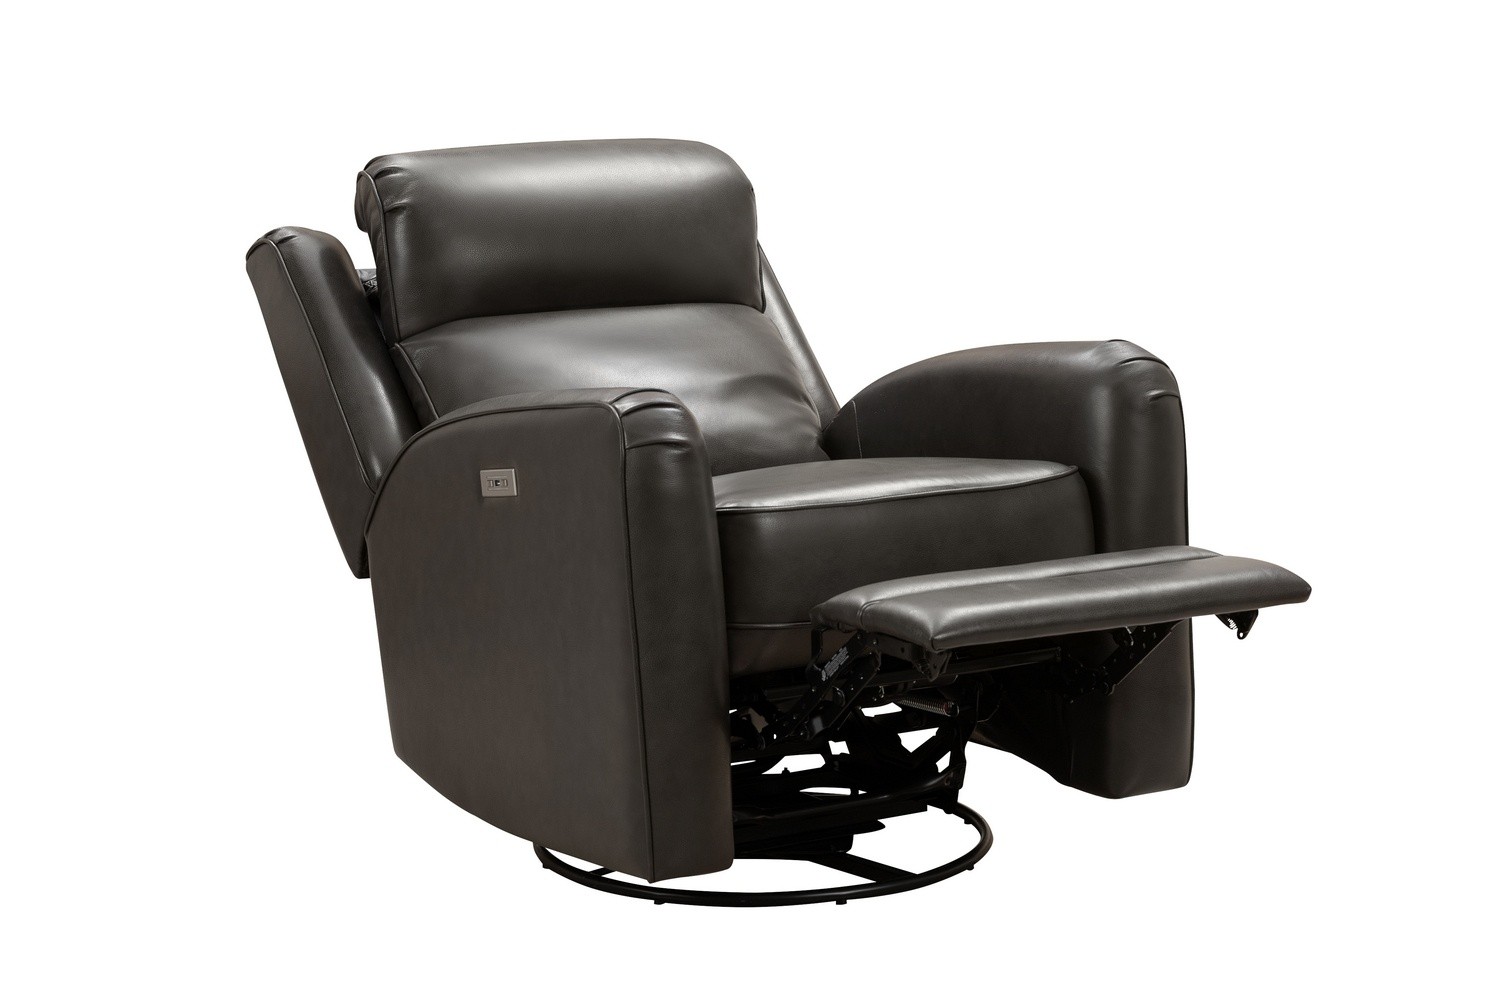 Barcalounger Kennedy Big and Tall Power Swivel Recliner Chair with Power Head Rest - Matteo Smokey Gray/Leather Match